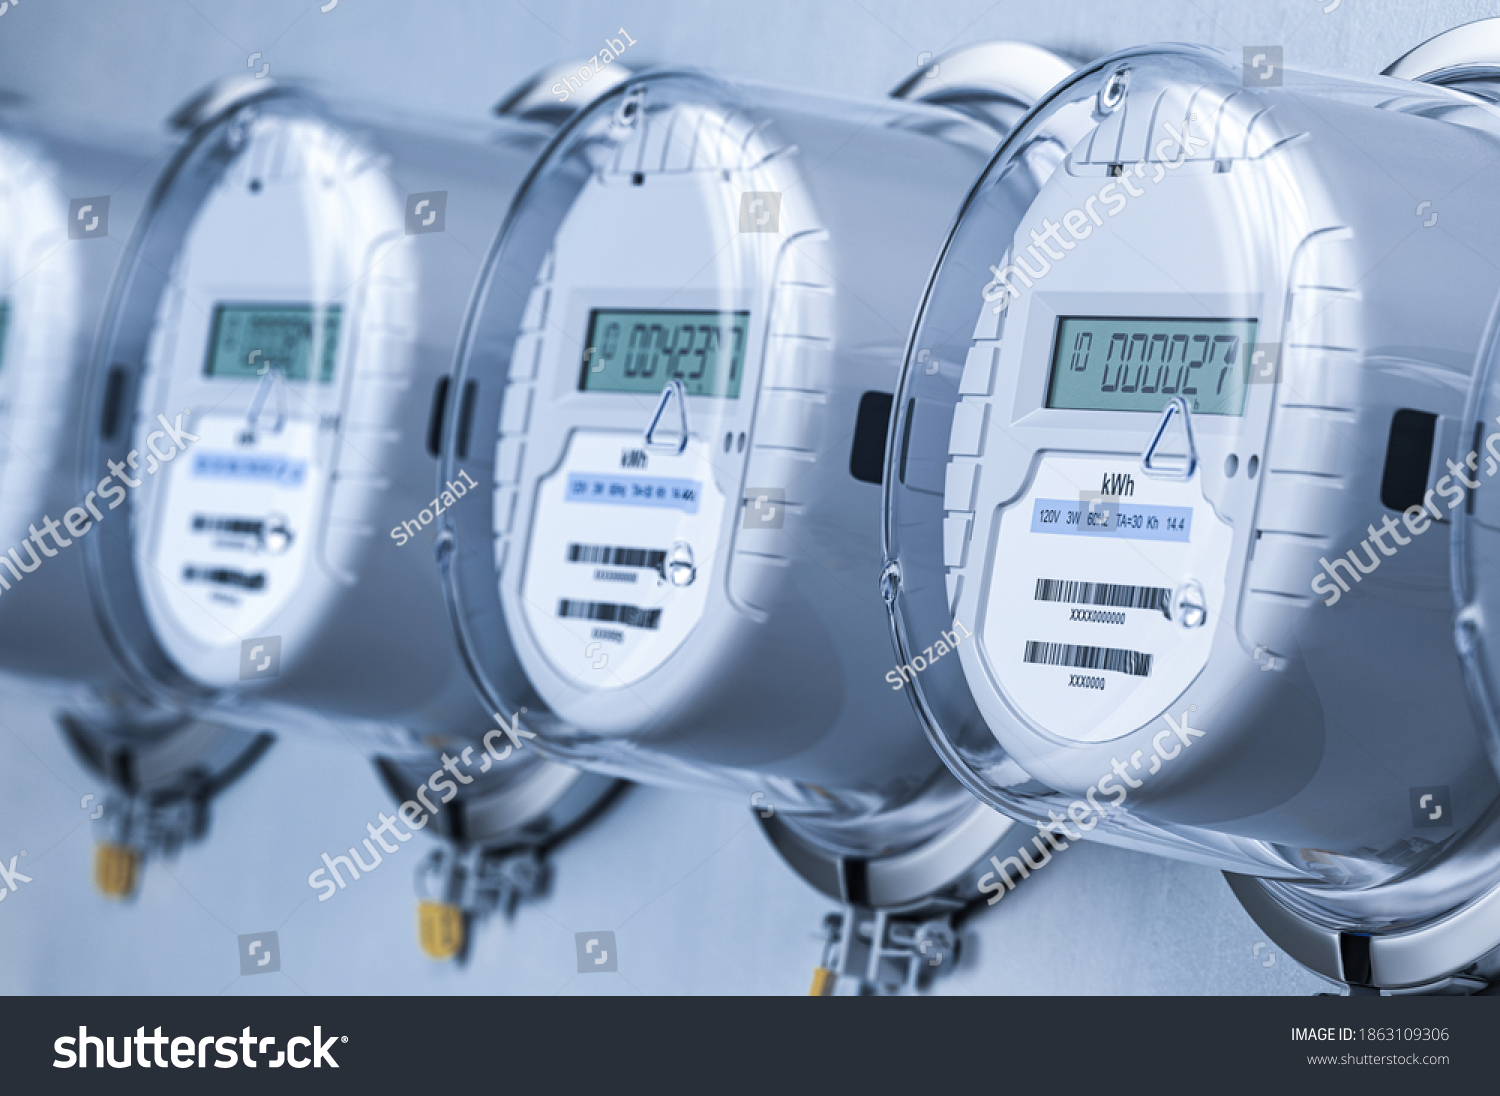 Digital electric meters in a row measuring power use. Electricity consumption concept. 3d illustration #1863109306